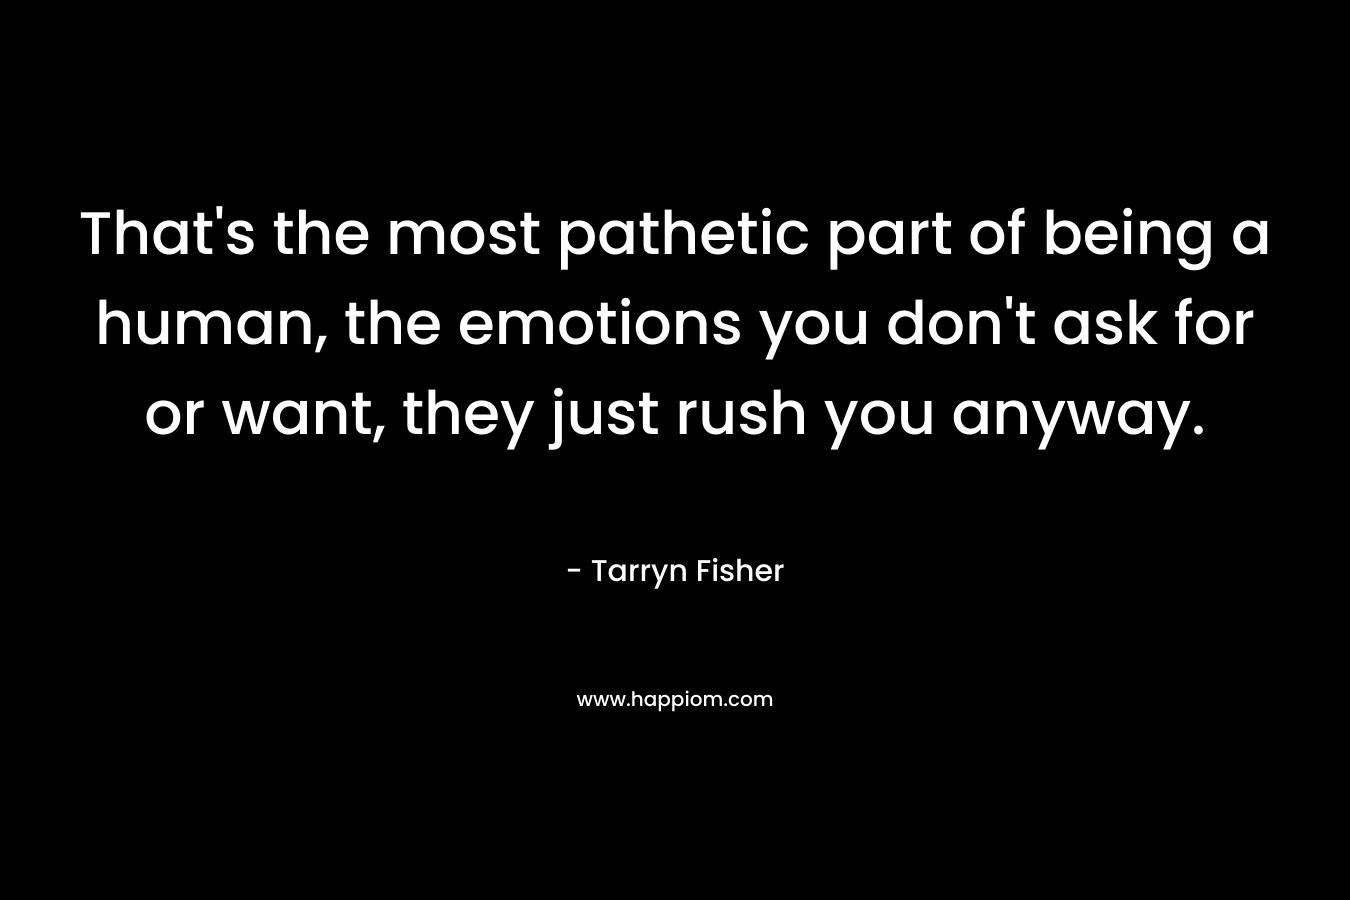 That’s the most pathetic part of being a human, the emotions you don’t ask for or want, they just rush you anyway. – Tarryn Fisher